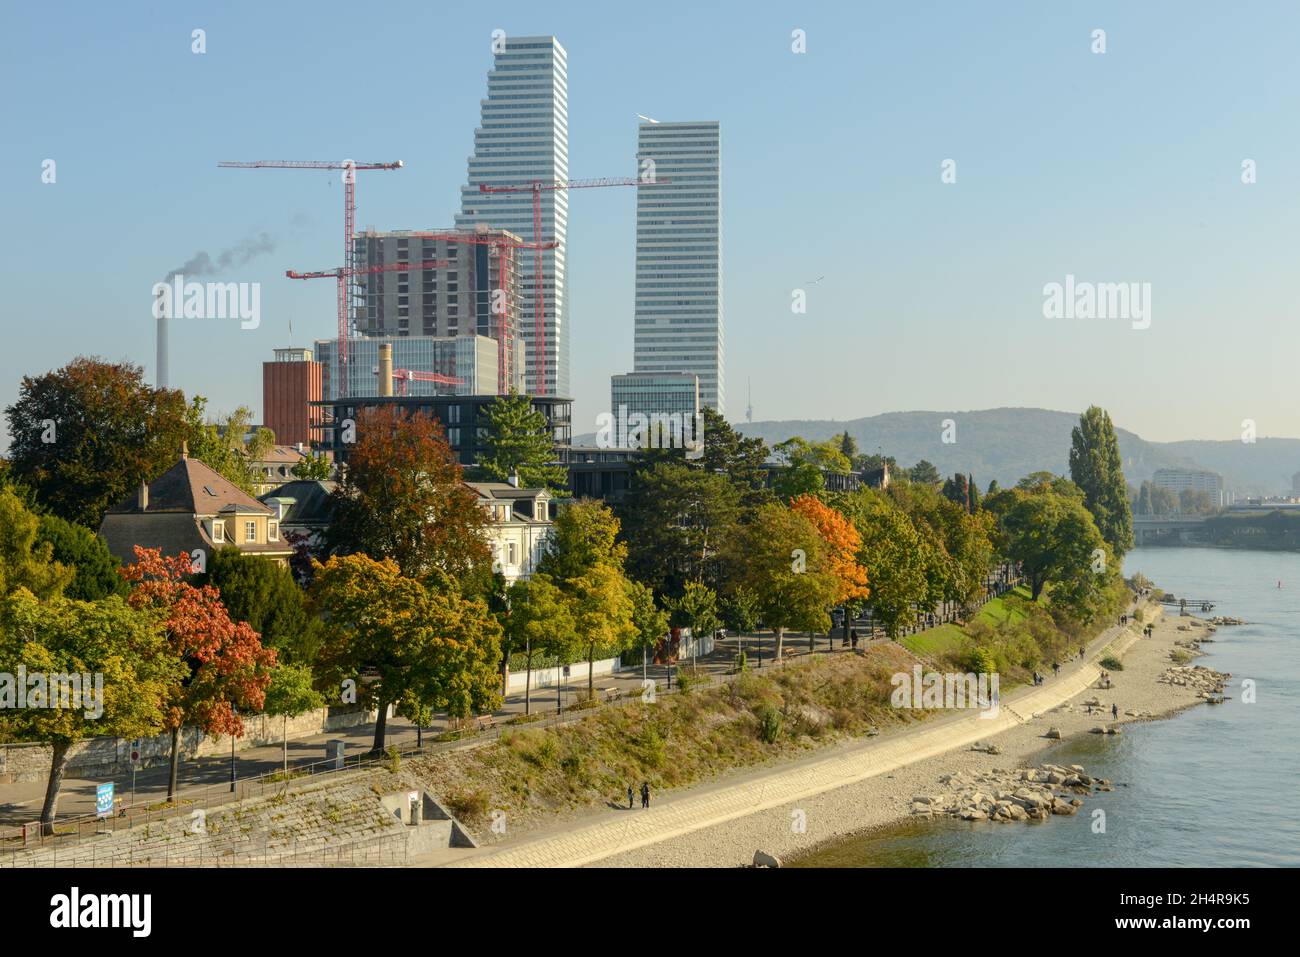 Basel, Switzerland - 17 September 2021: view at the Roche industry towers at Basel on Switzerland Stock Photo